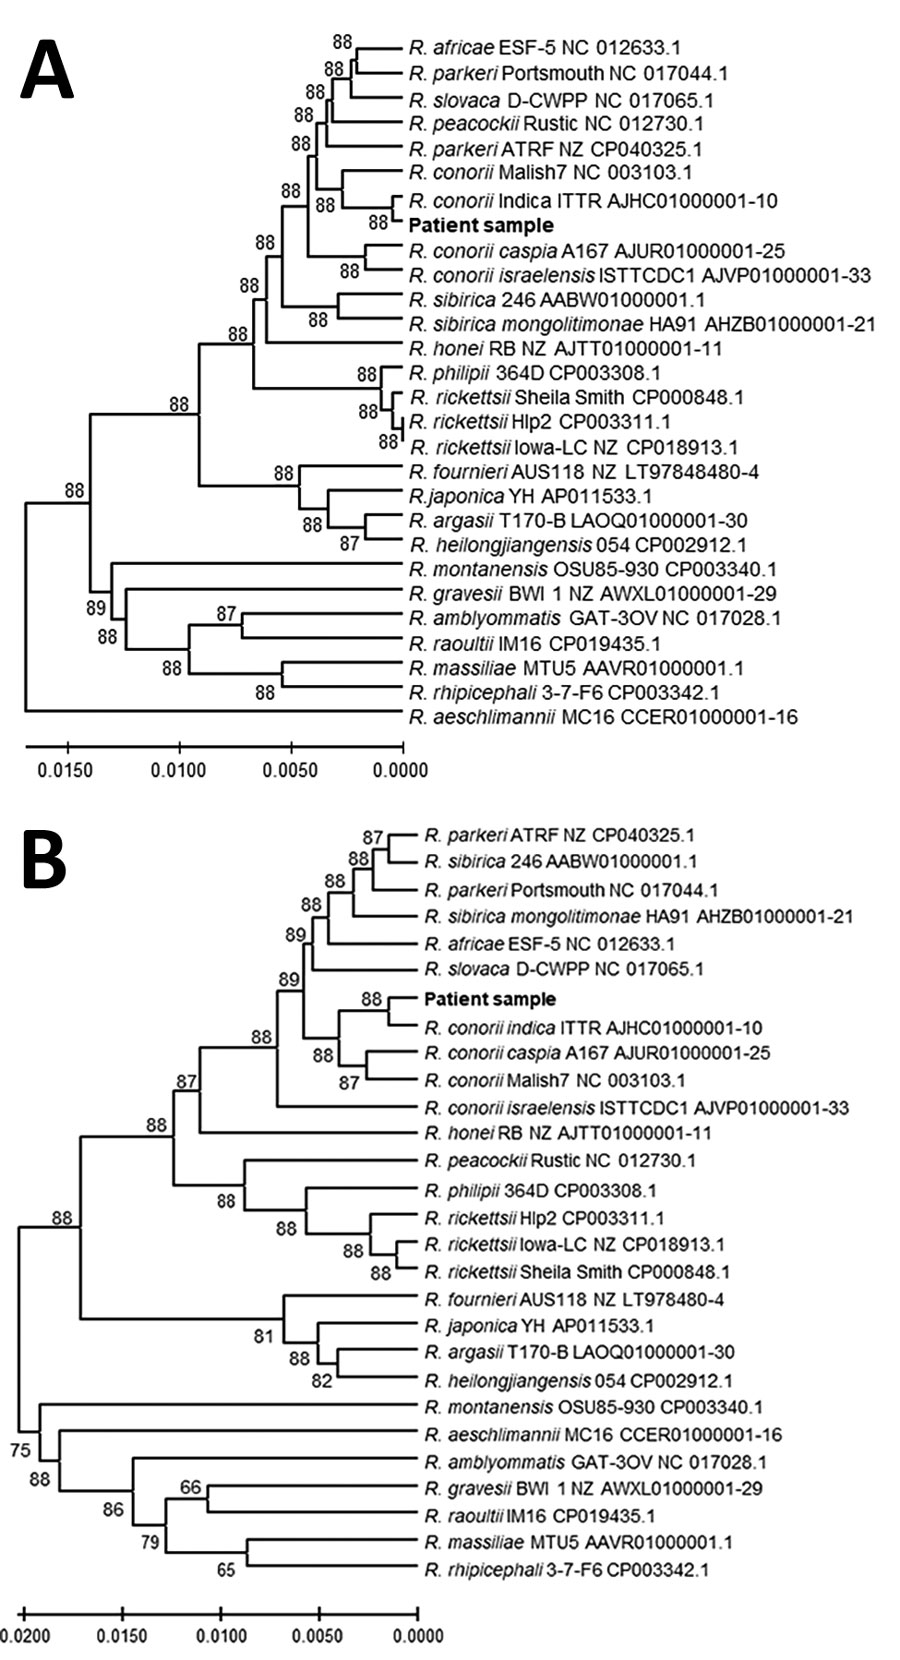 Genetic relationships of the spotted fever group rickettsia detected in blood of patient 1 in study of confirmation of Rickettsia conorii subspecies indica infection by next-generation sequencing, Shandong, China. This analysis used concatenated sequences from 27 spotted fever rickettsial genomes homologous to the patient sequences (shown in bold text). A) Analysis of 1,379 positions in the tRNA-associated sequences; B) analysis of 1,519 positions in the protein gene–associated sequences. Each tree was constructed upon concatenation of 6 different genome sites (Appendix Table 2); the consensus of reads from sites with overlapping reads was used. The evolutionary relationships were inferred by using UPGMA implemented in MEGA X (15). The optimal trees are shown. The percentage of replicate trees in which the taxa clustered together in the bootstrap test (500 replicates) are shown next to the branches. The evolutionary distances computed by using the Kimura 2-parameter method are in the units of the number of base substitutions per site. The proportion of sites where >1 unambiguous base is present in >1 sequence for each descendent clade is shown next each internal node in the tree. All ambiguous positions were removed for each sequence pair (pairwise deletion option). Scale bars indicate the percentage of nucleotide variation between the sequences. 